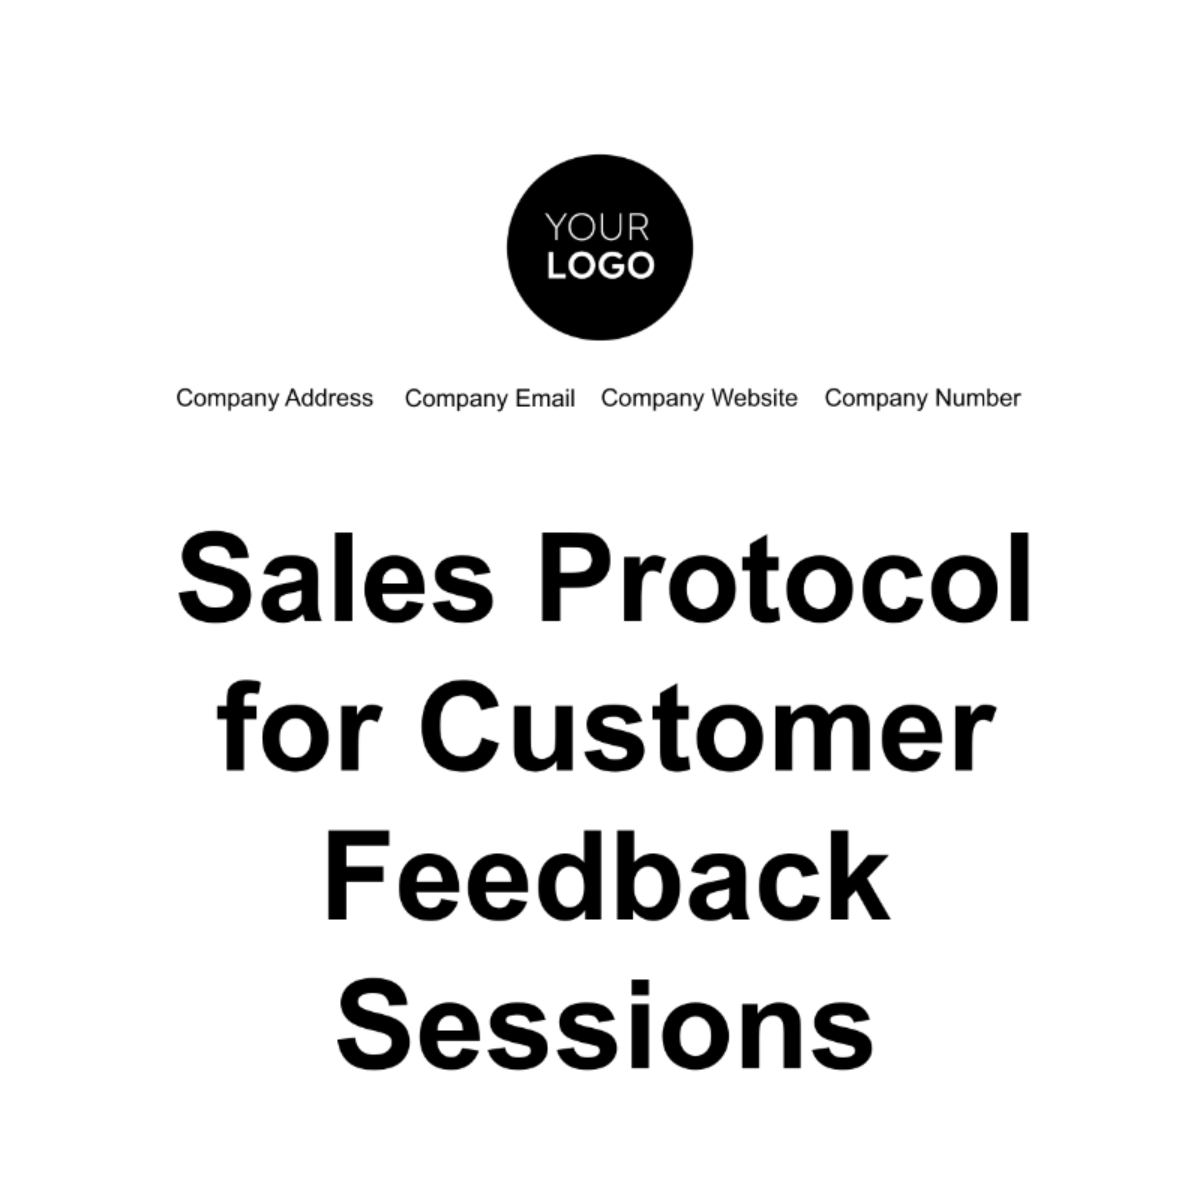 Sales Protocol for Customer Feedback Sessions Template